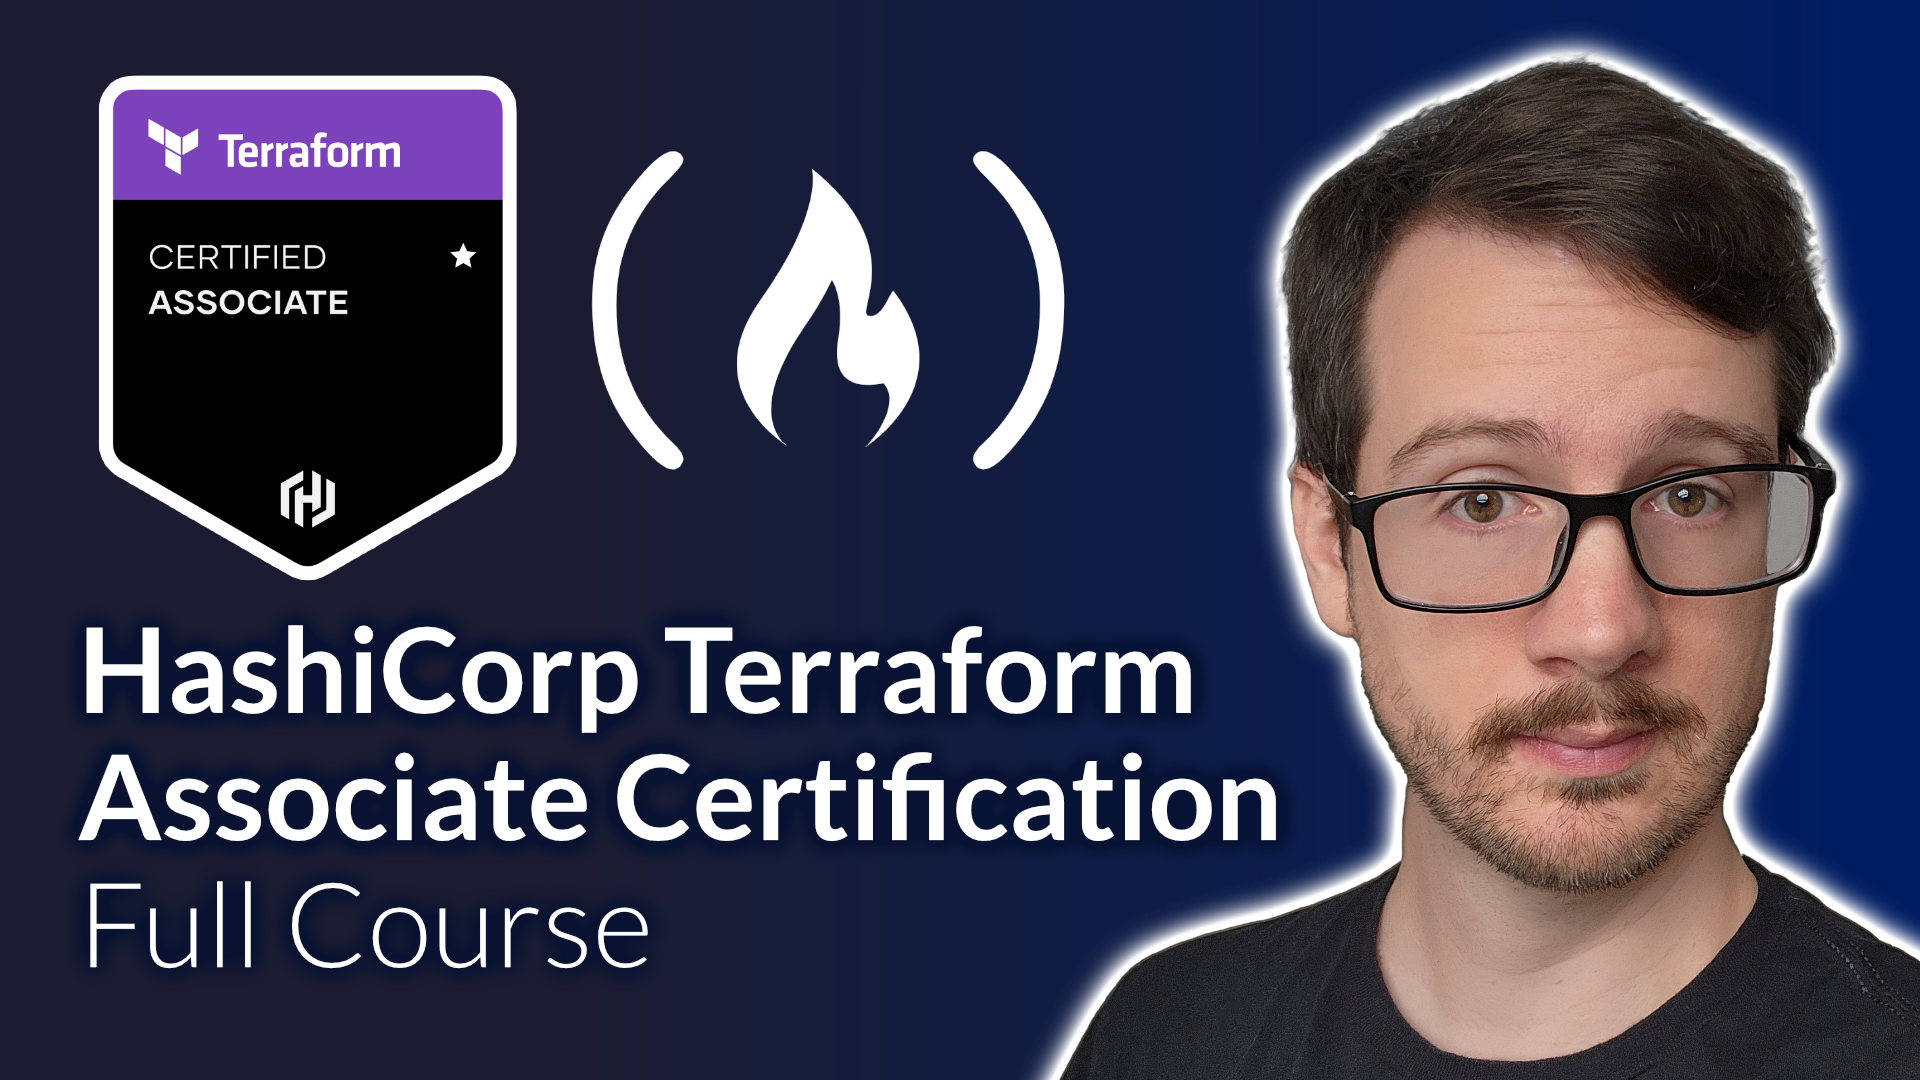 HashiCorp Terraform Associate Certification Study Course – Pass the Exam With This Free 7 Hour Course